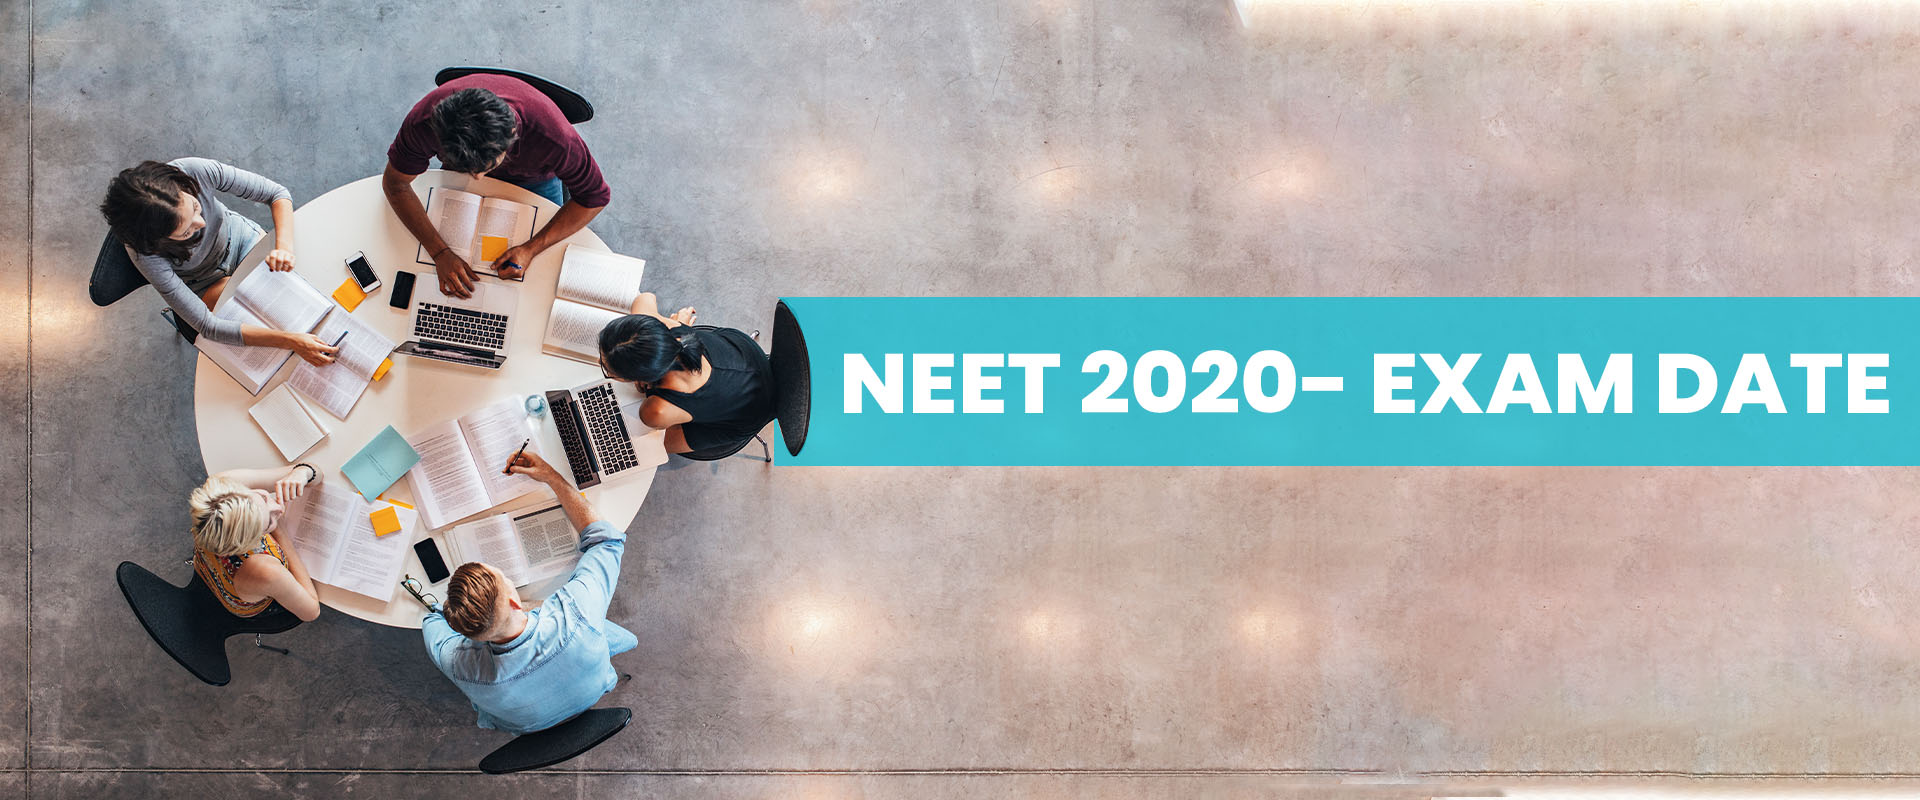 NEET 2020- Exam Date (May 3, 2020), Application Form, Eligibility Criteria and Examination TIPS